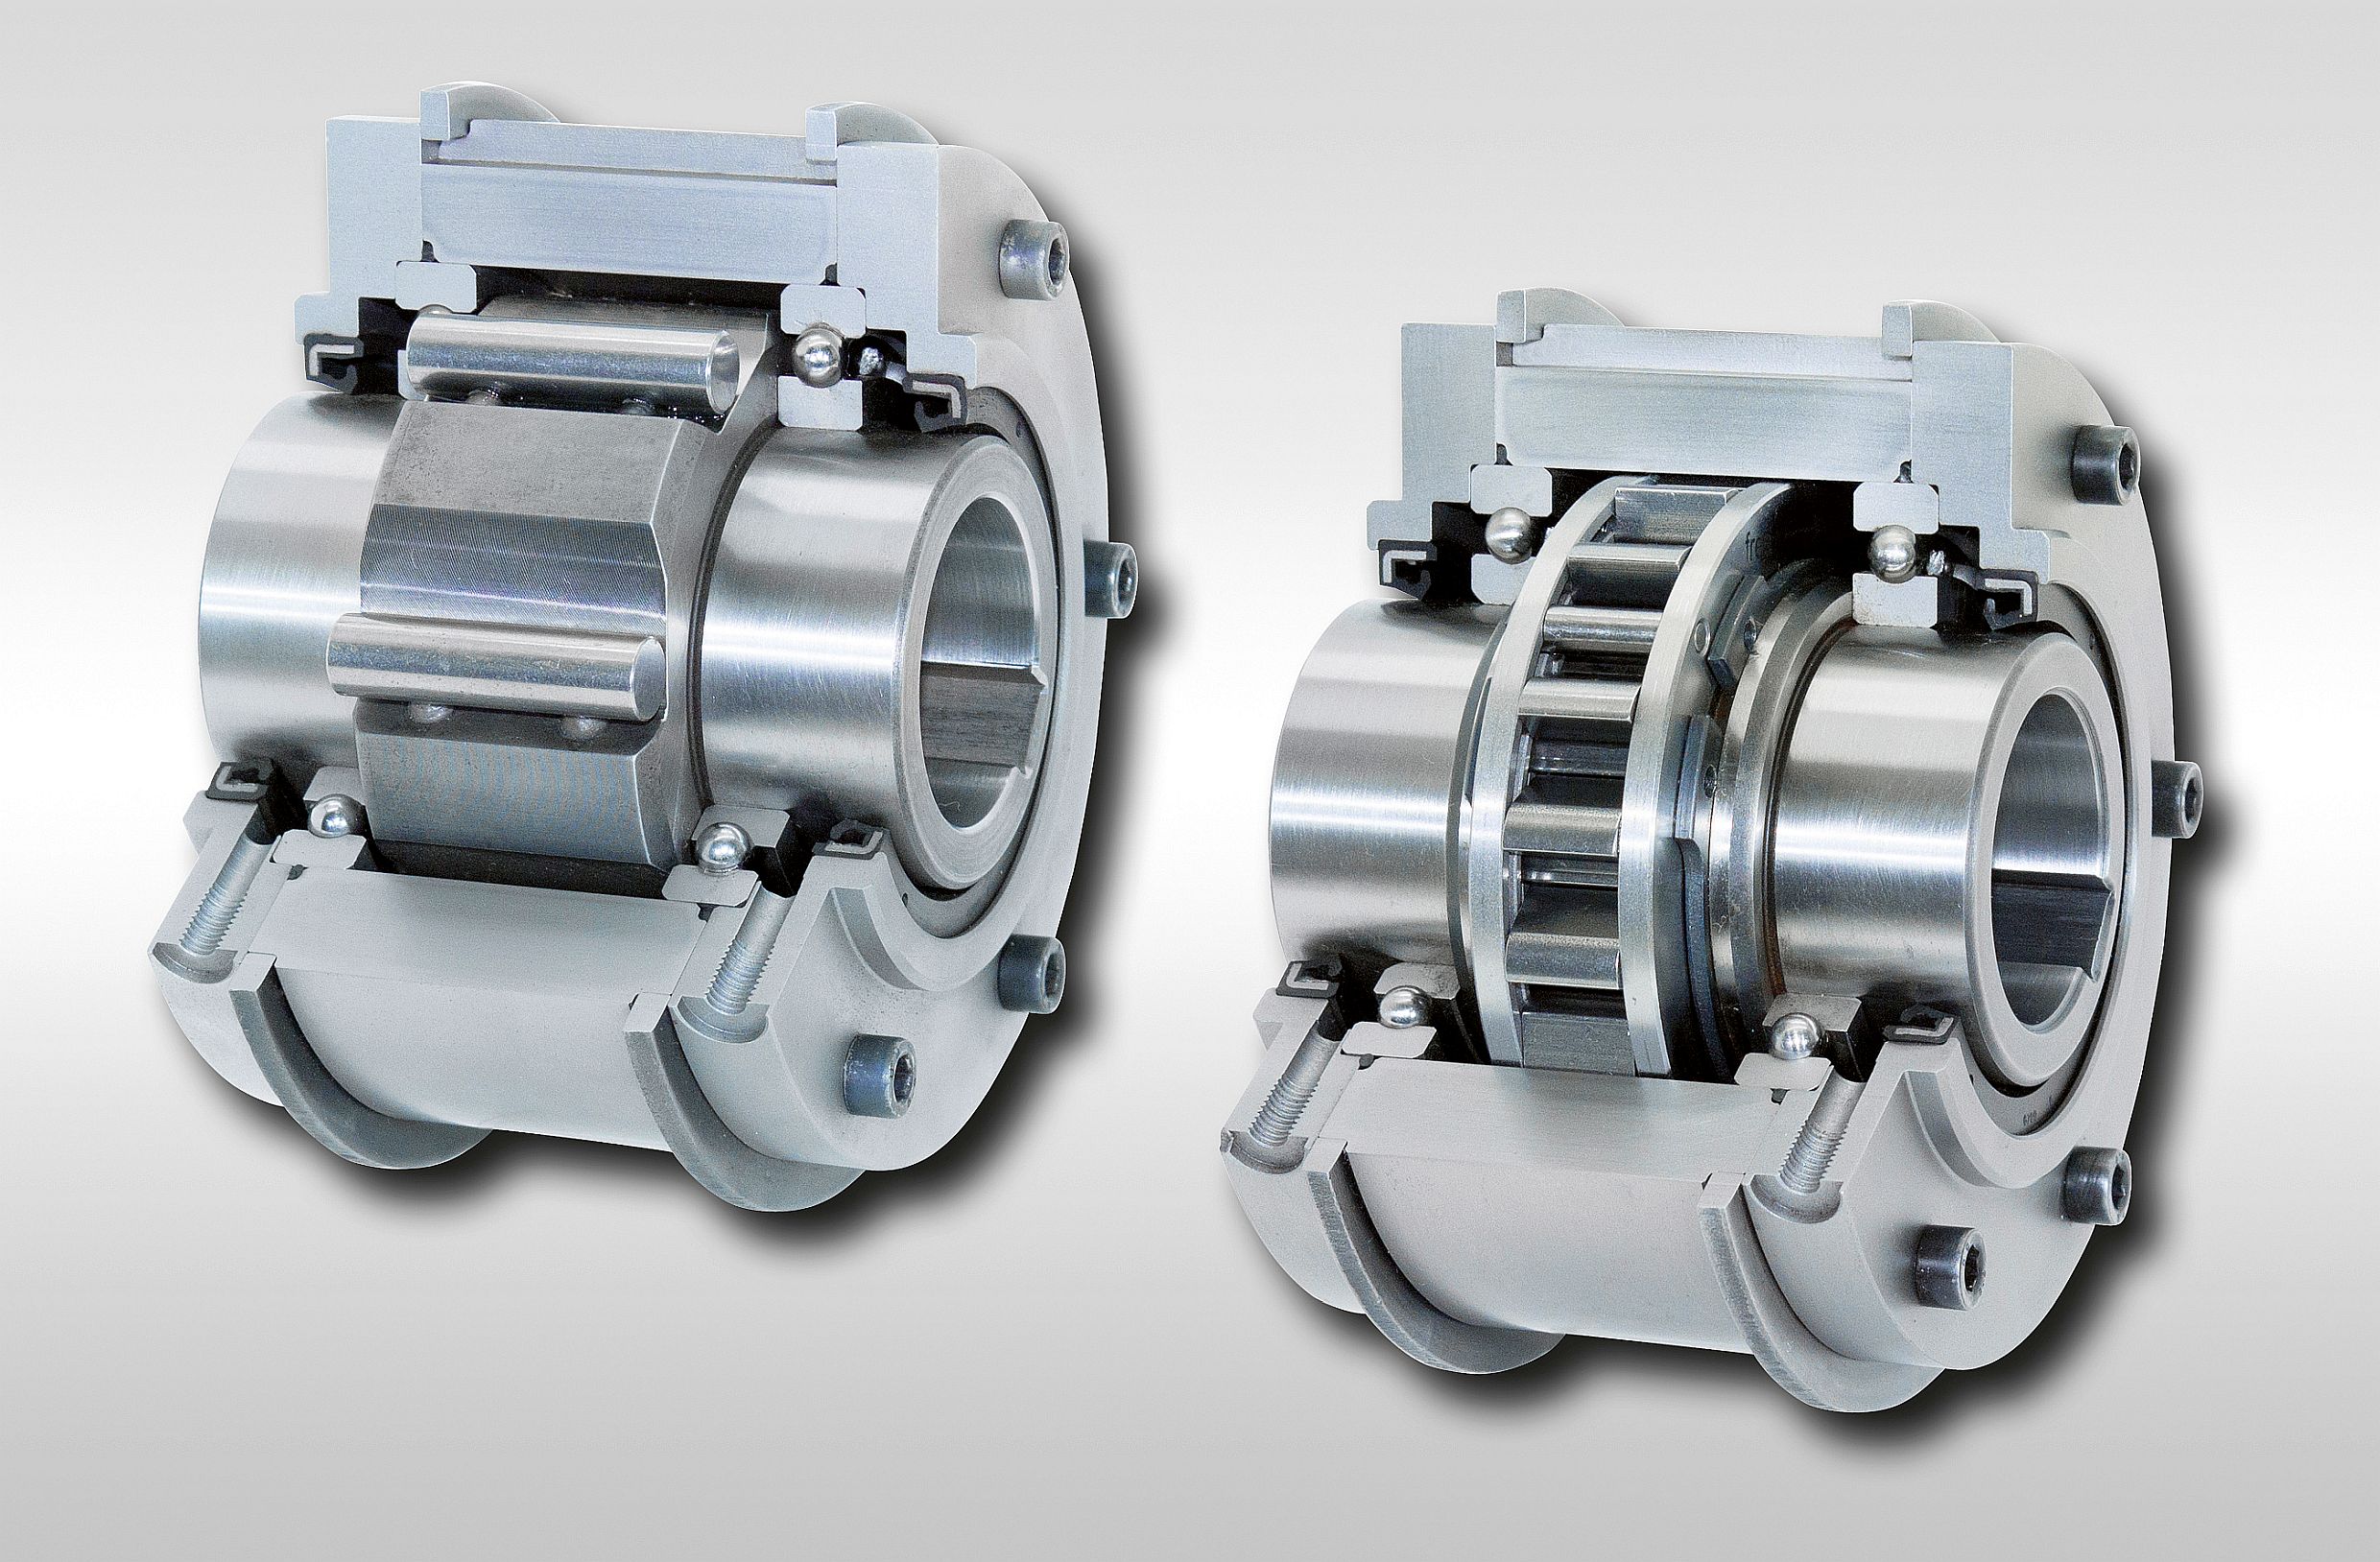 complete freewheels of the BM series from RINGSPANN